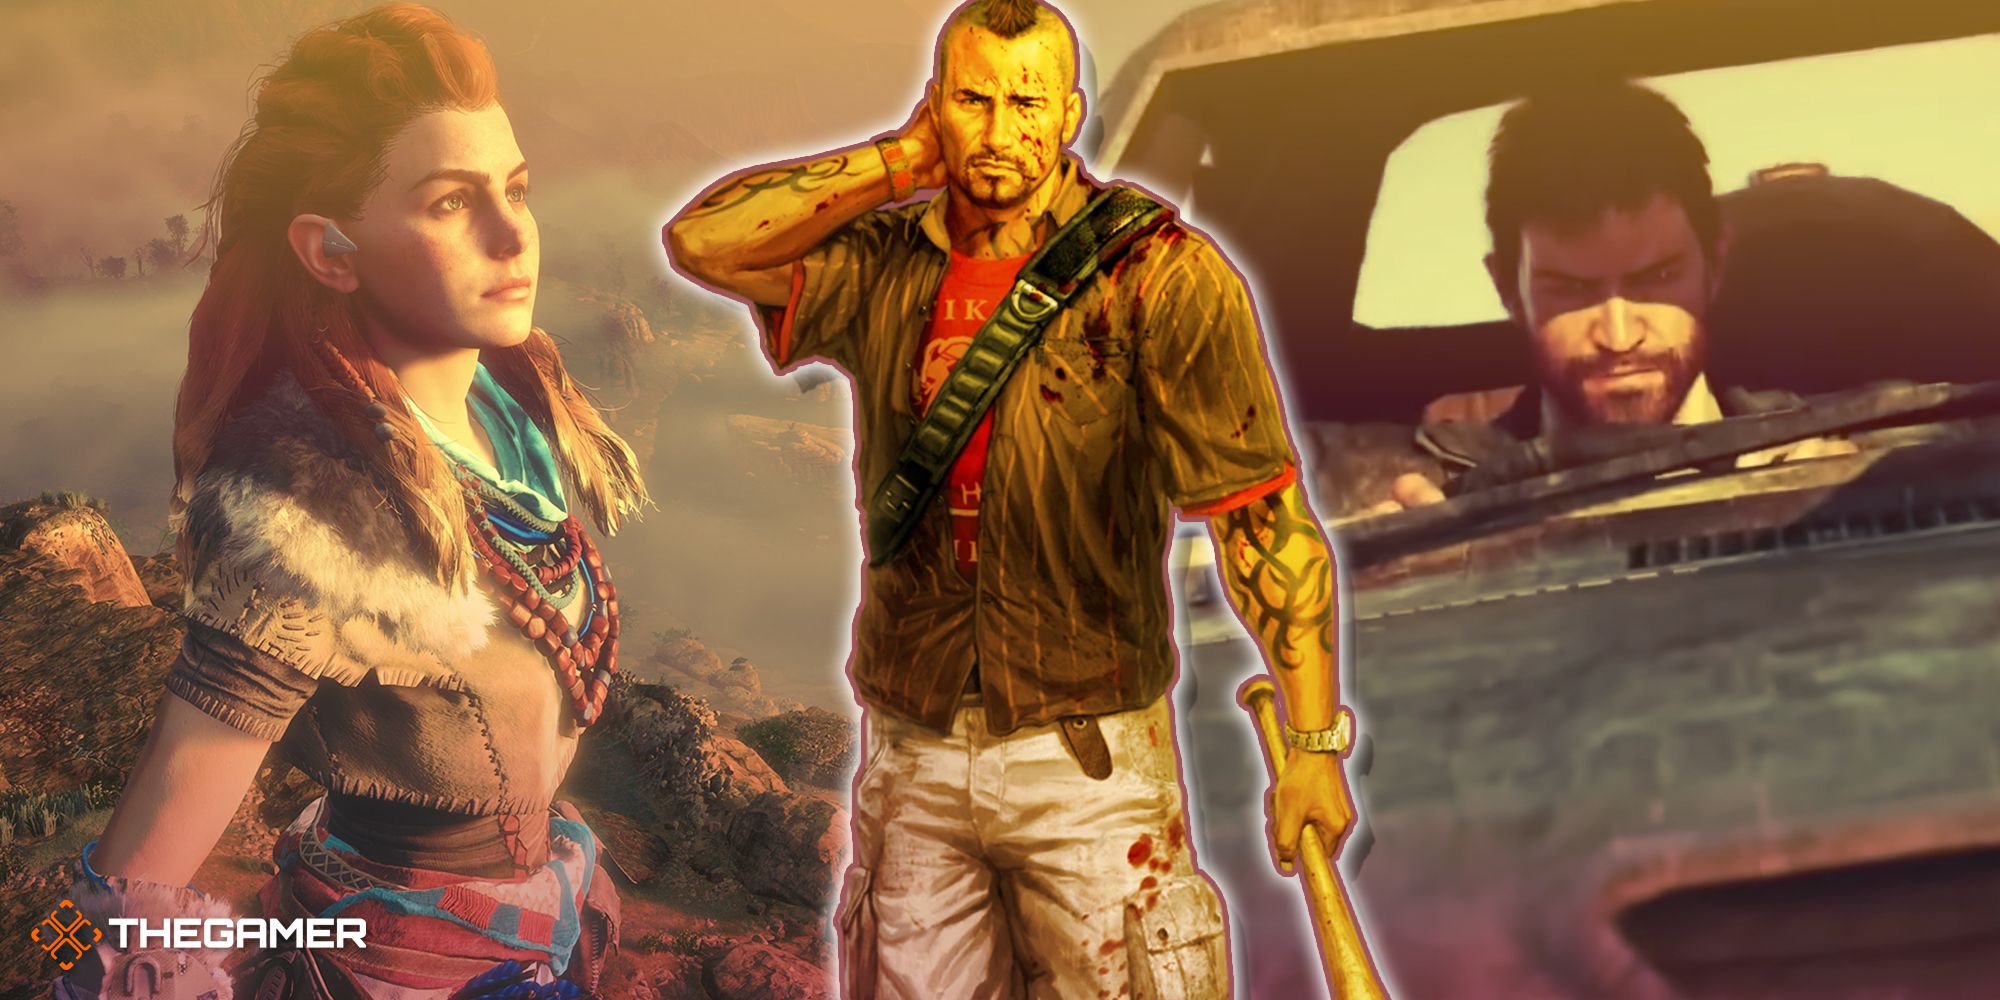 When will Far Cry 7 be released? Check the Latest News Here!